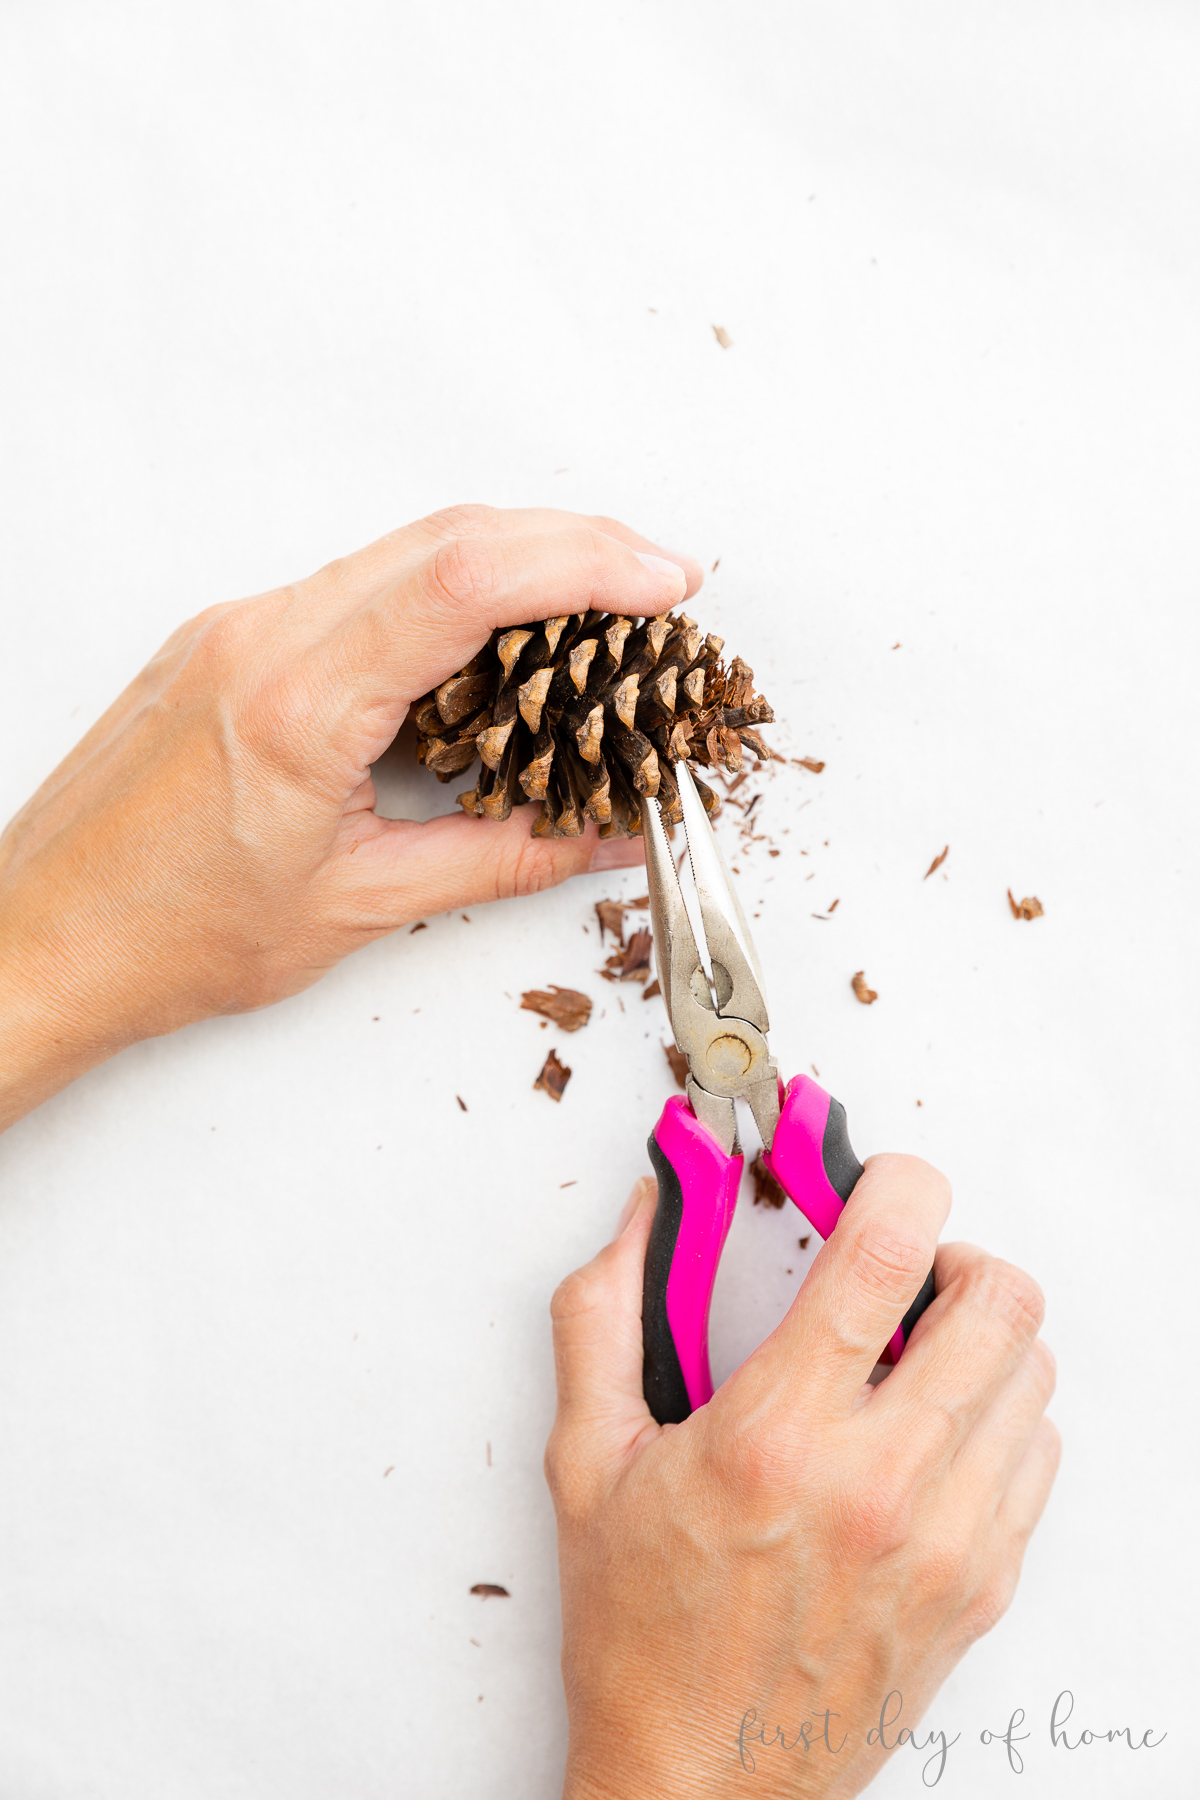 Preparing pinecones for crafting by removing scales